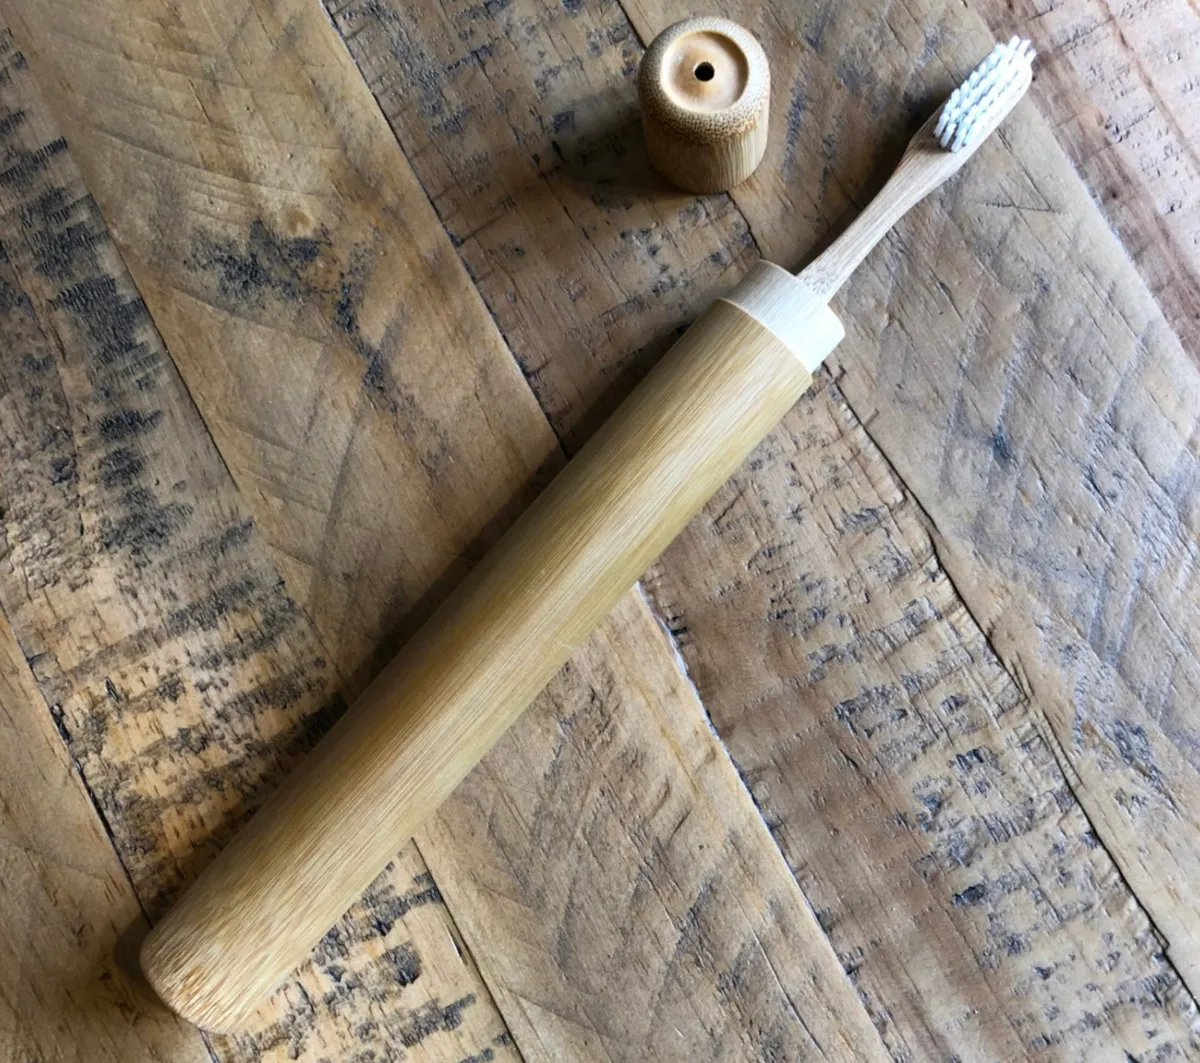 Bamboo Toothbrush and Travel Case